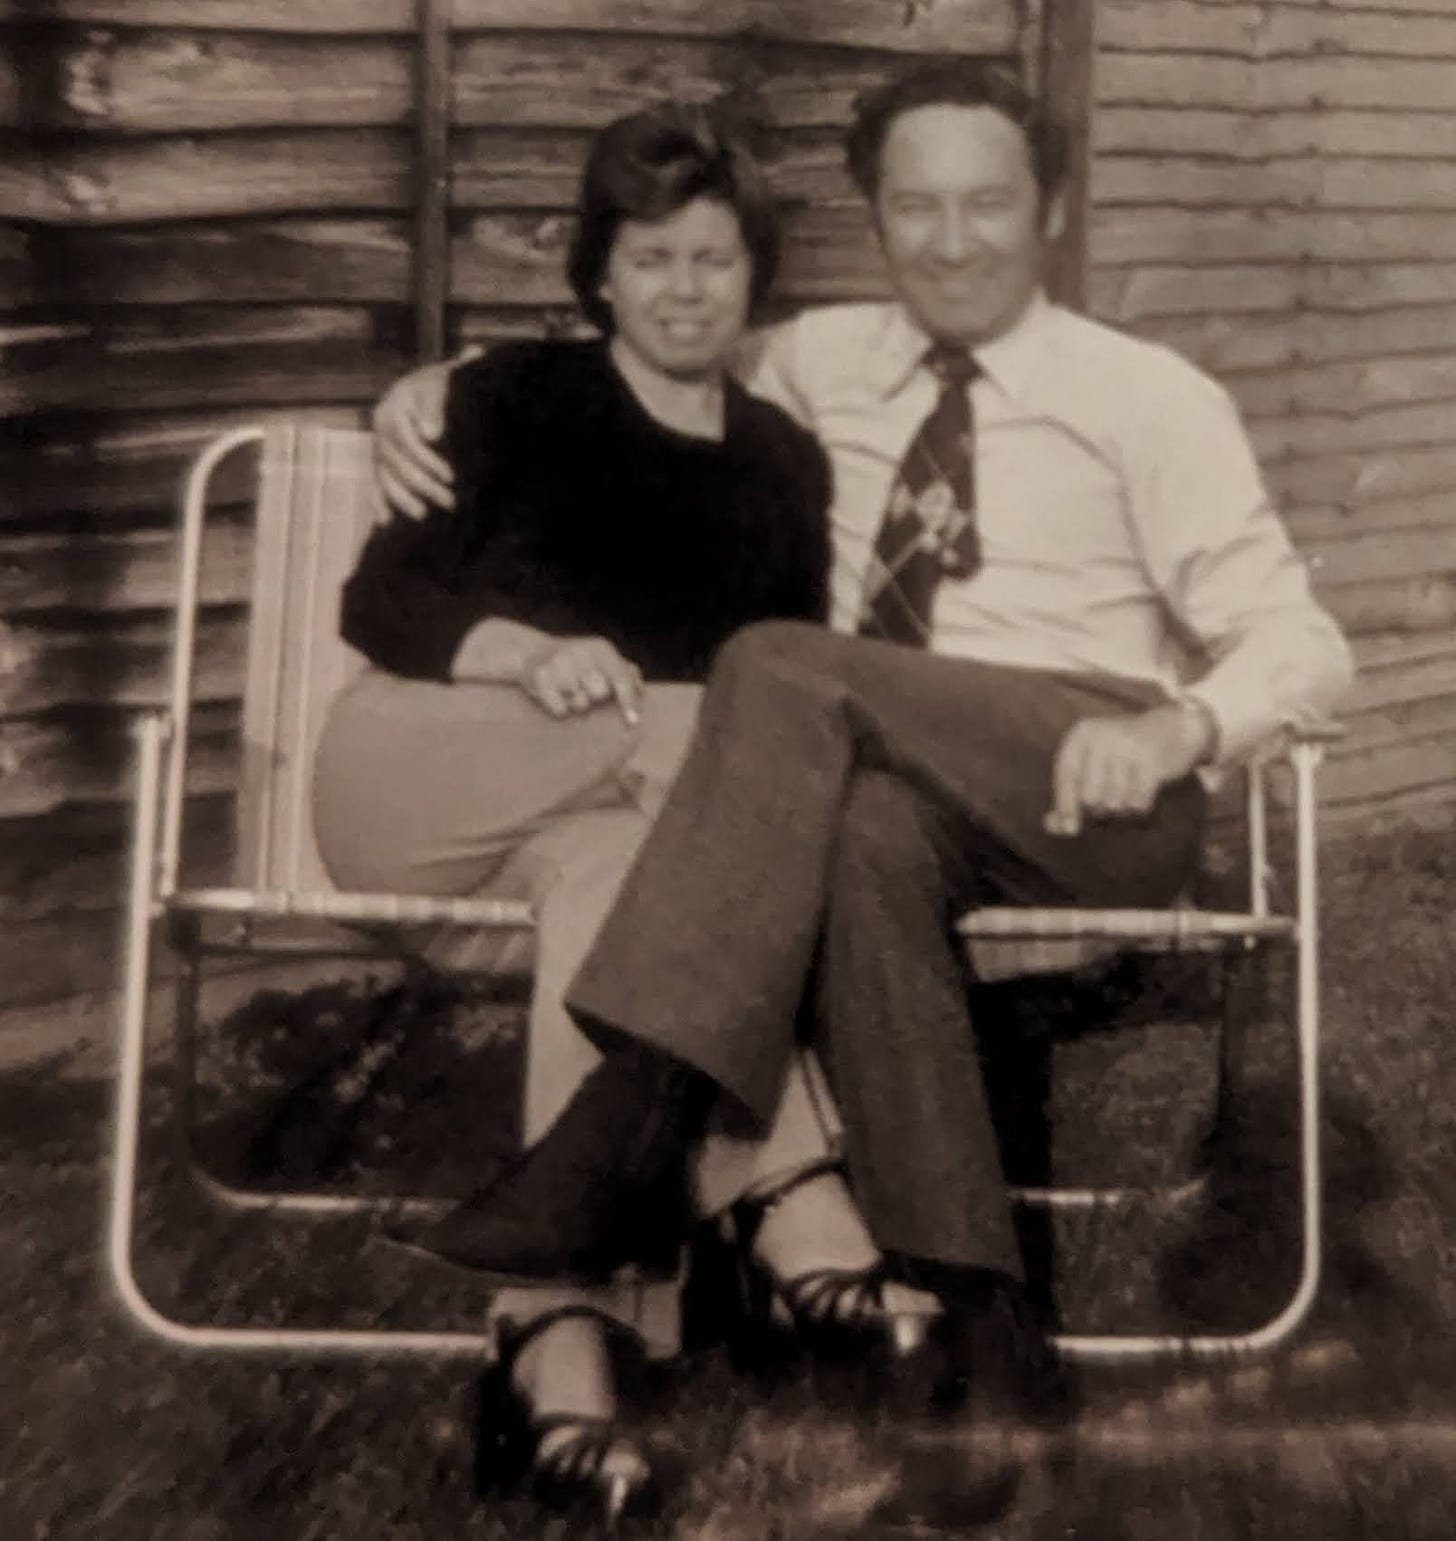 A man and woman sit on deckchairs in a small garden, arms and legs intertwined